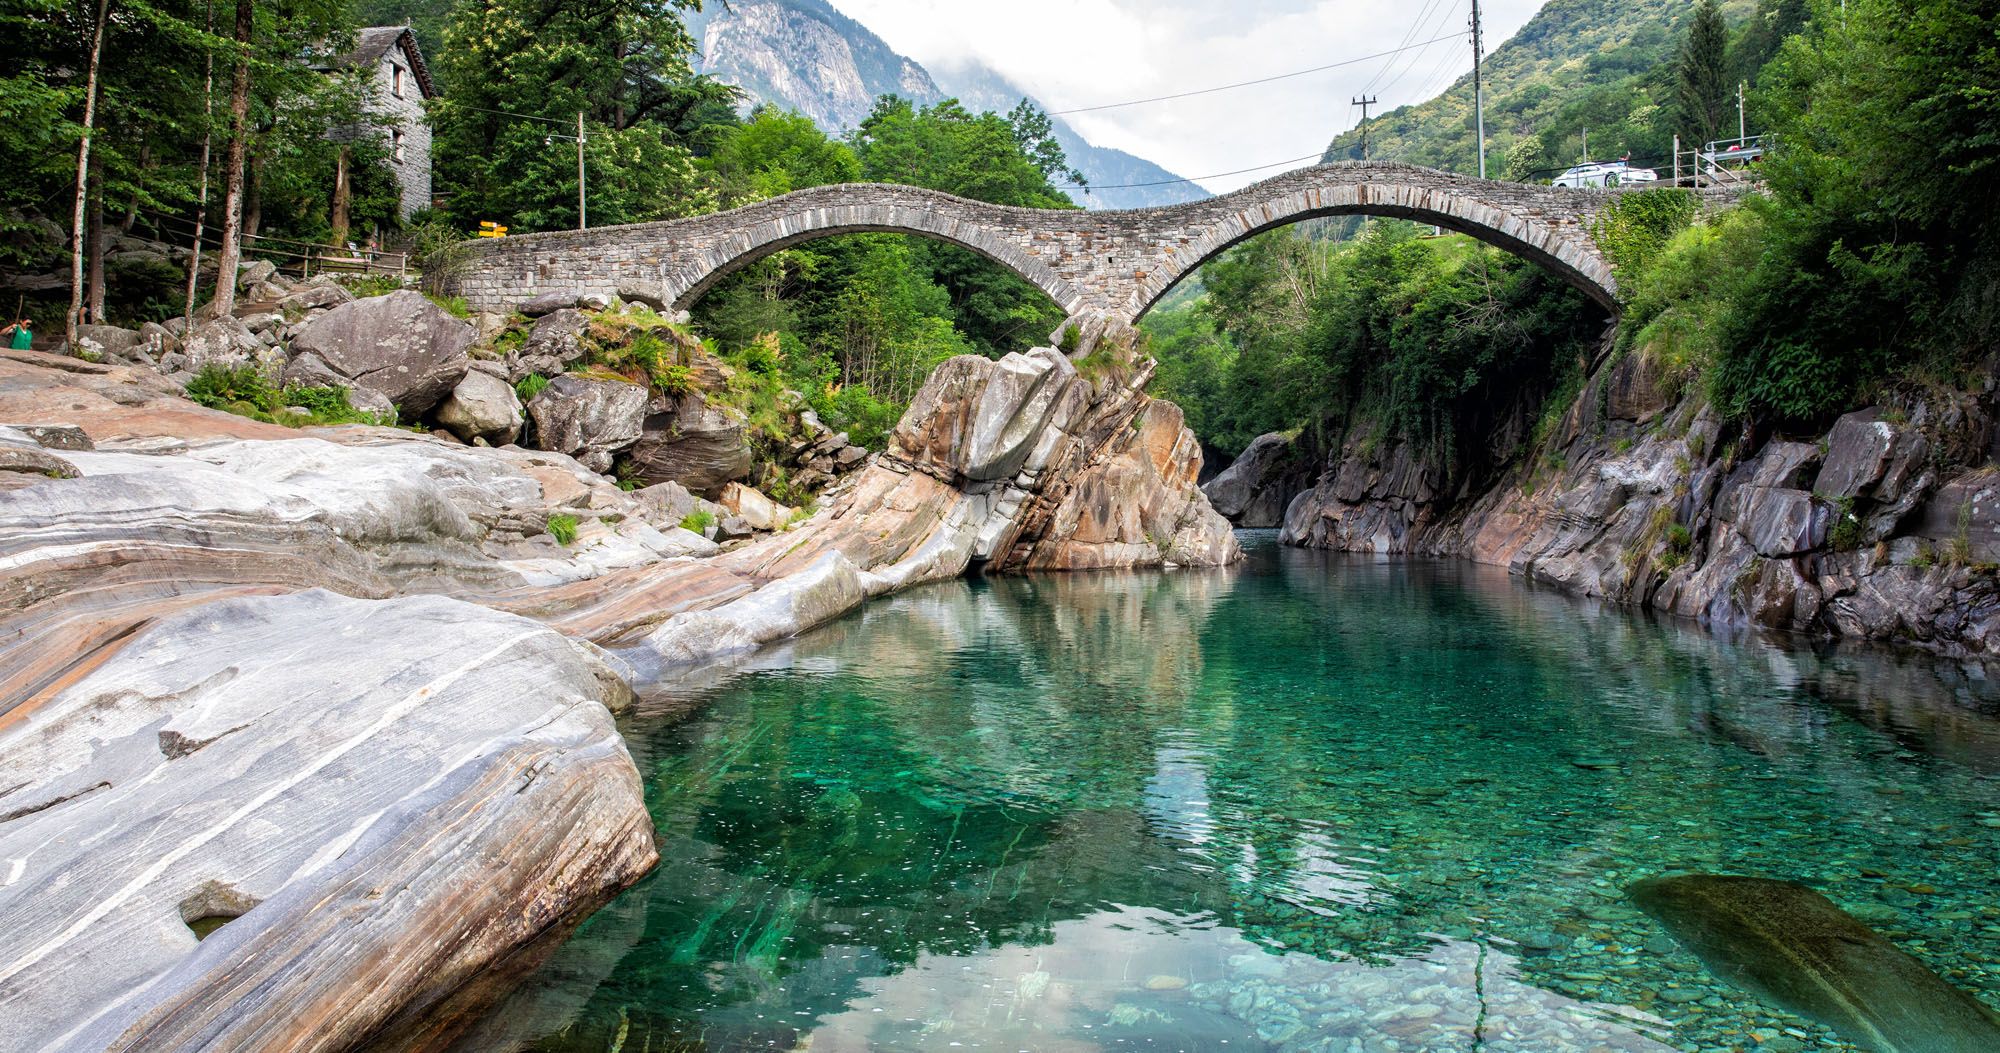 Featured image for “How to Visit Ponte dei Salti, Verzasca Valley, Switzerland”